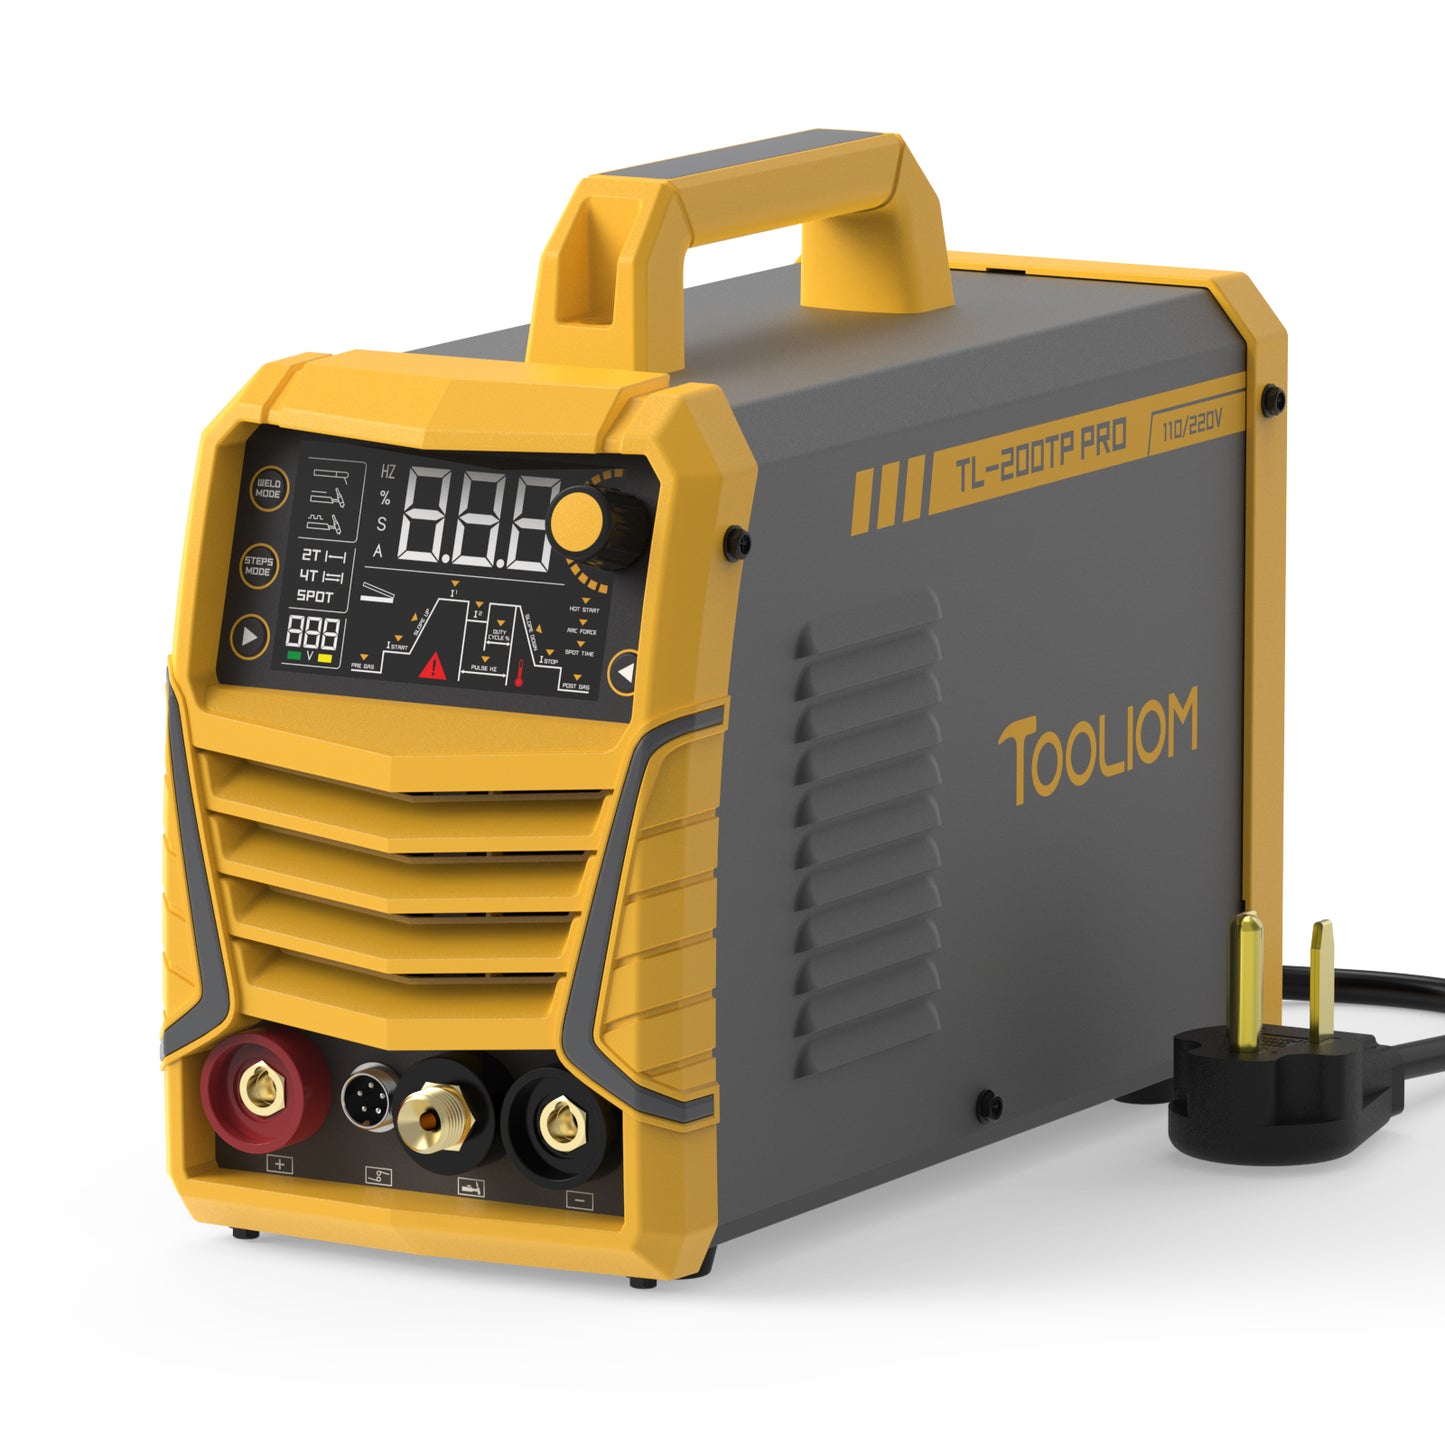 TIG/Stick High Frequency Dual Voltage TL-200TP-PRO 2 in 1 Welding Machine